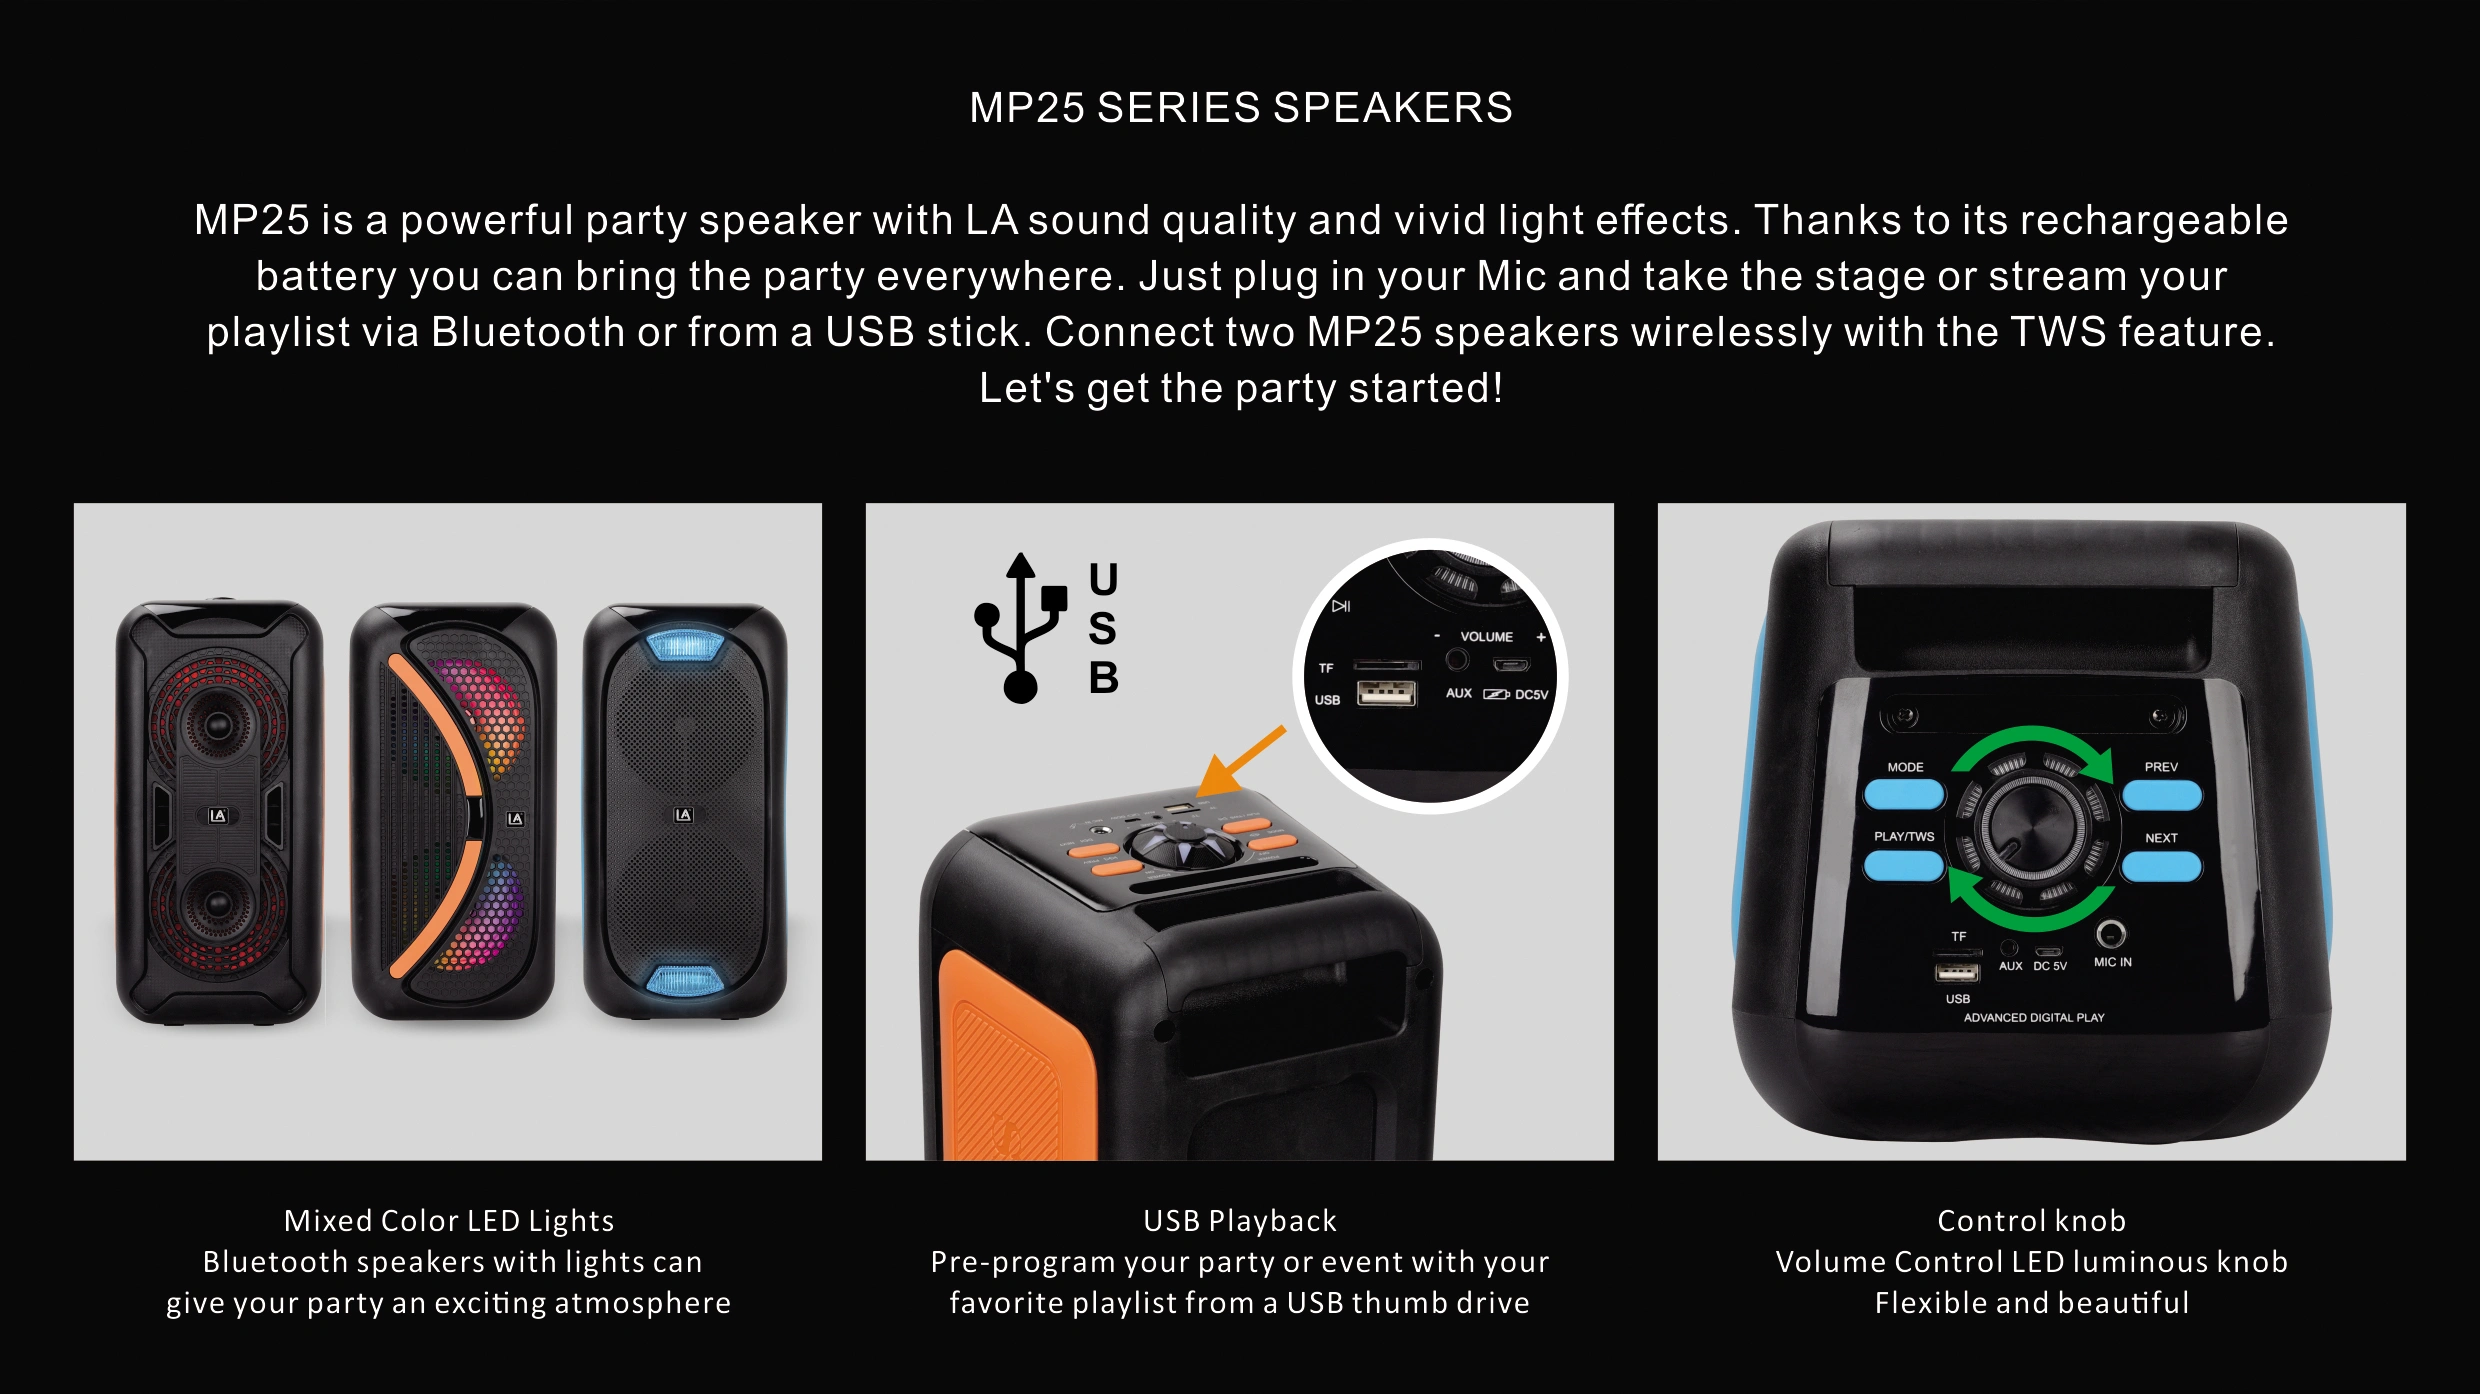 MP25 SERIES SPEAKERS MP25 is a powerful party speaker with LA sound quality and vivid light effects. Thanks to its rechargeable battery you can bring the party everywhere. Just plug in your Mic and take the stage or stream your playlist via Bluetooth or from a USB stick. Connect two MP25 speakers wirelessly with the TWS feature. Let's get the party started!